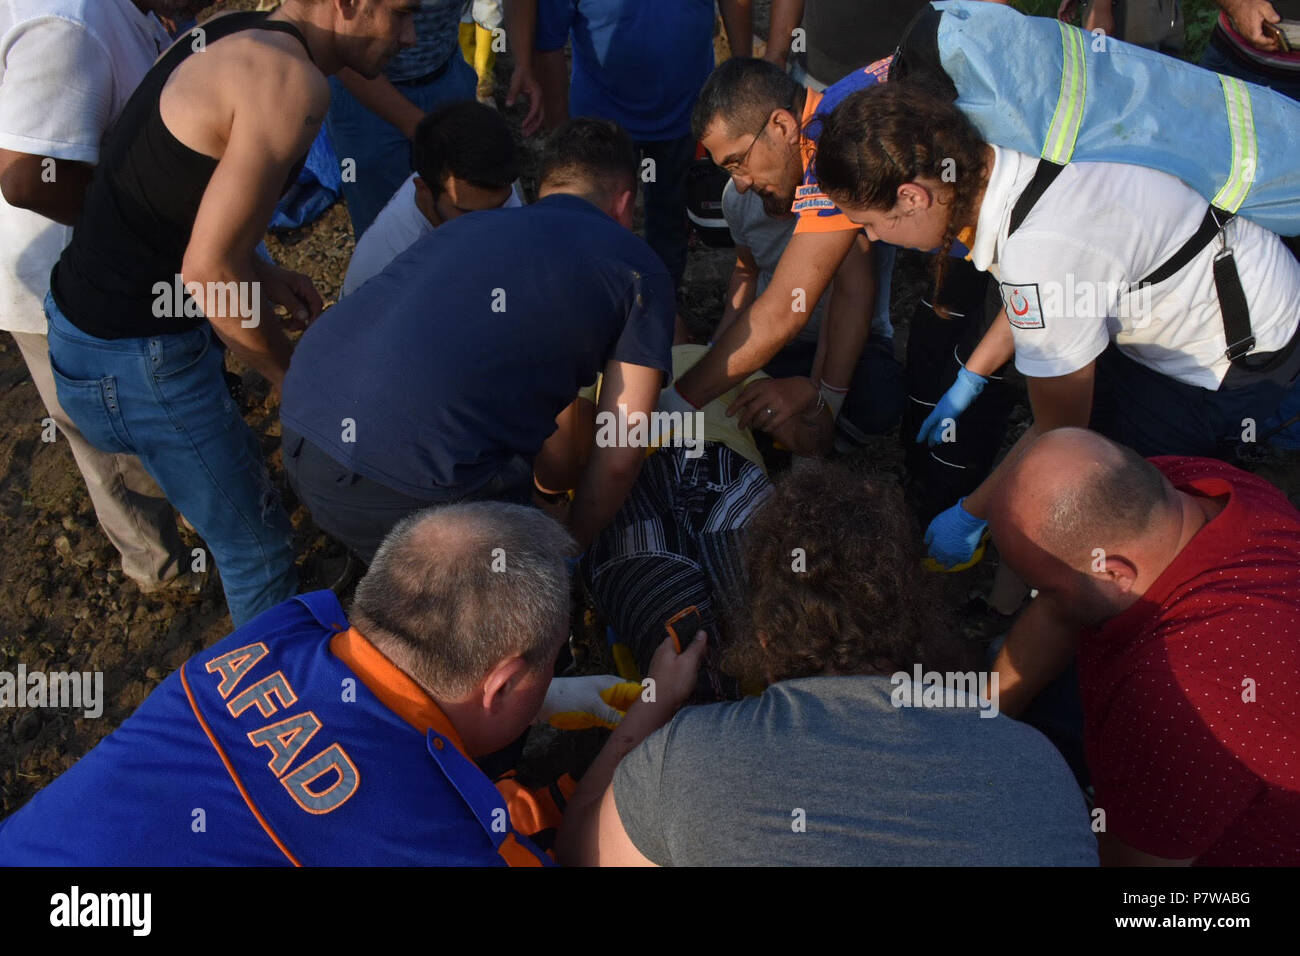 Ankara. 8th July, 2018. Rescuers help an injured passenger after a train derailed in Tekirdag, northwestern Turkey, July 8, 2018. At least 10 people were killed and 73 others were injured when a commuter train derailed on Sunday in Turkey's northwestern Tekirdag province, local media reported. Credit: Xinhua/Alamy Live News Stock Photo